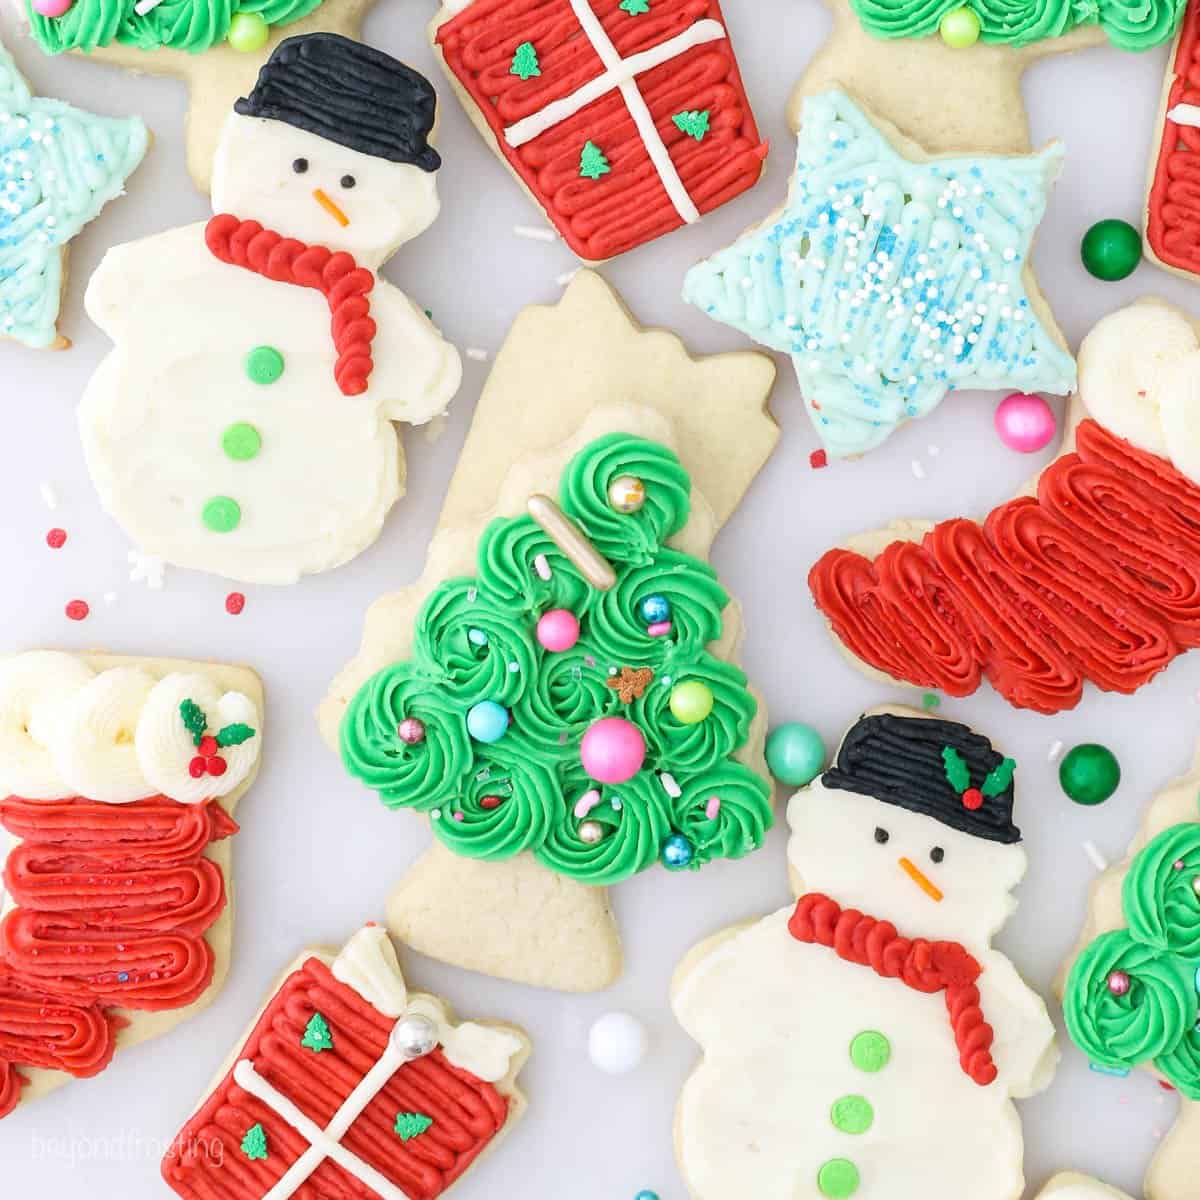 Can You Freeze Decorated Sugar Cookies? How To Store Royal Icing Cookies